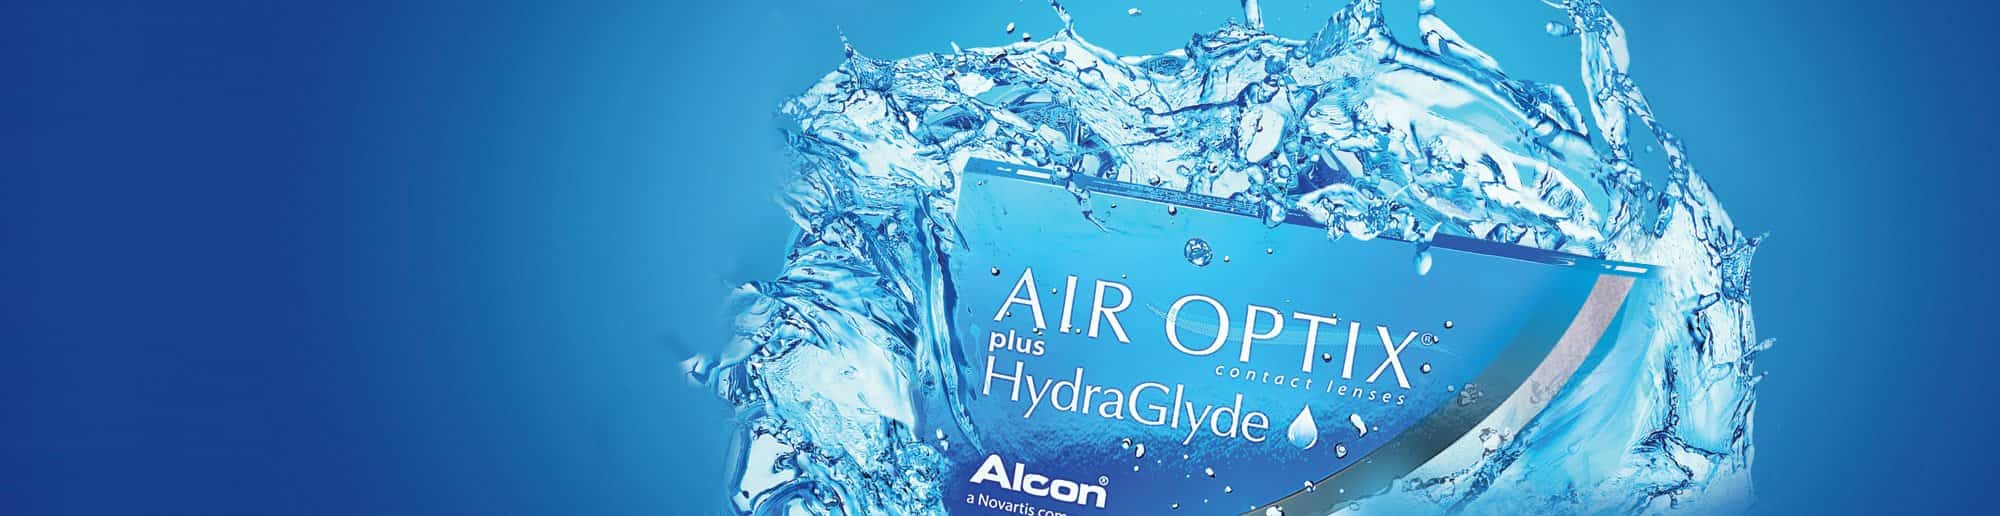 Ad for air optix plus hydraglyde in Johnstown, PA